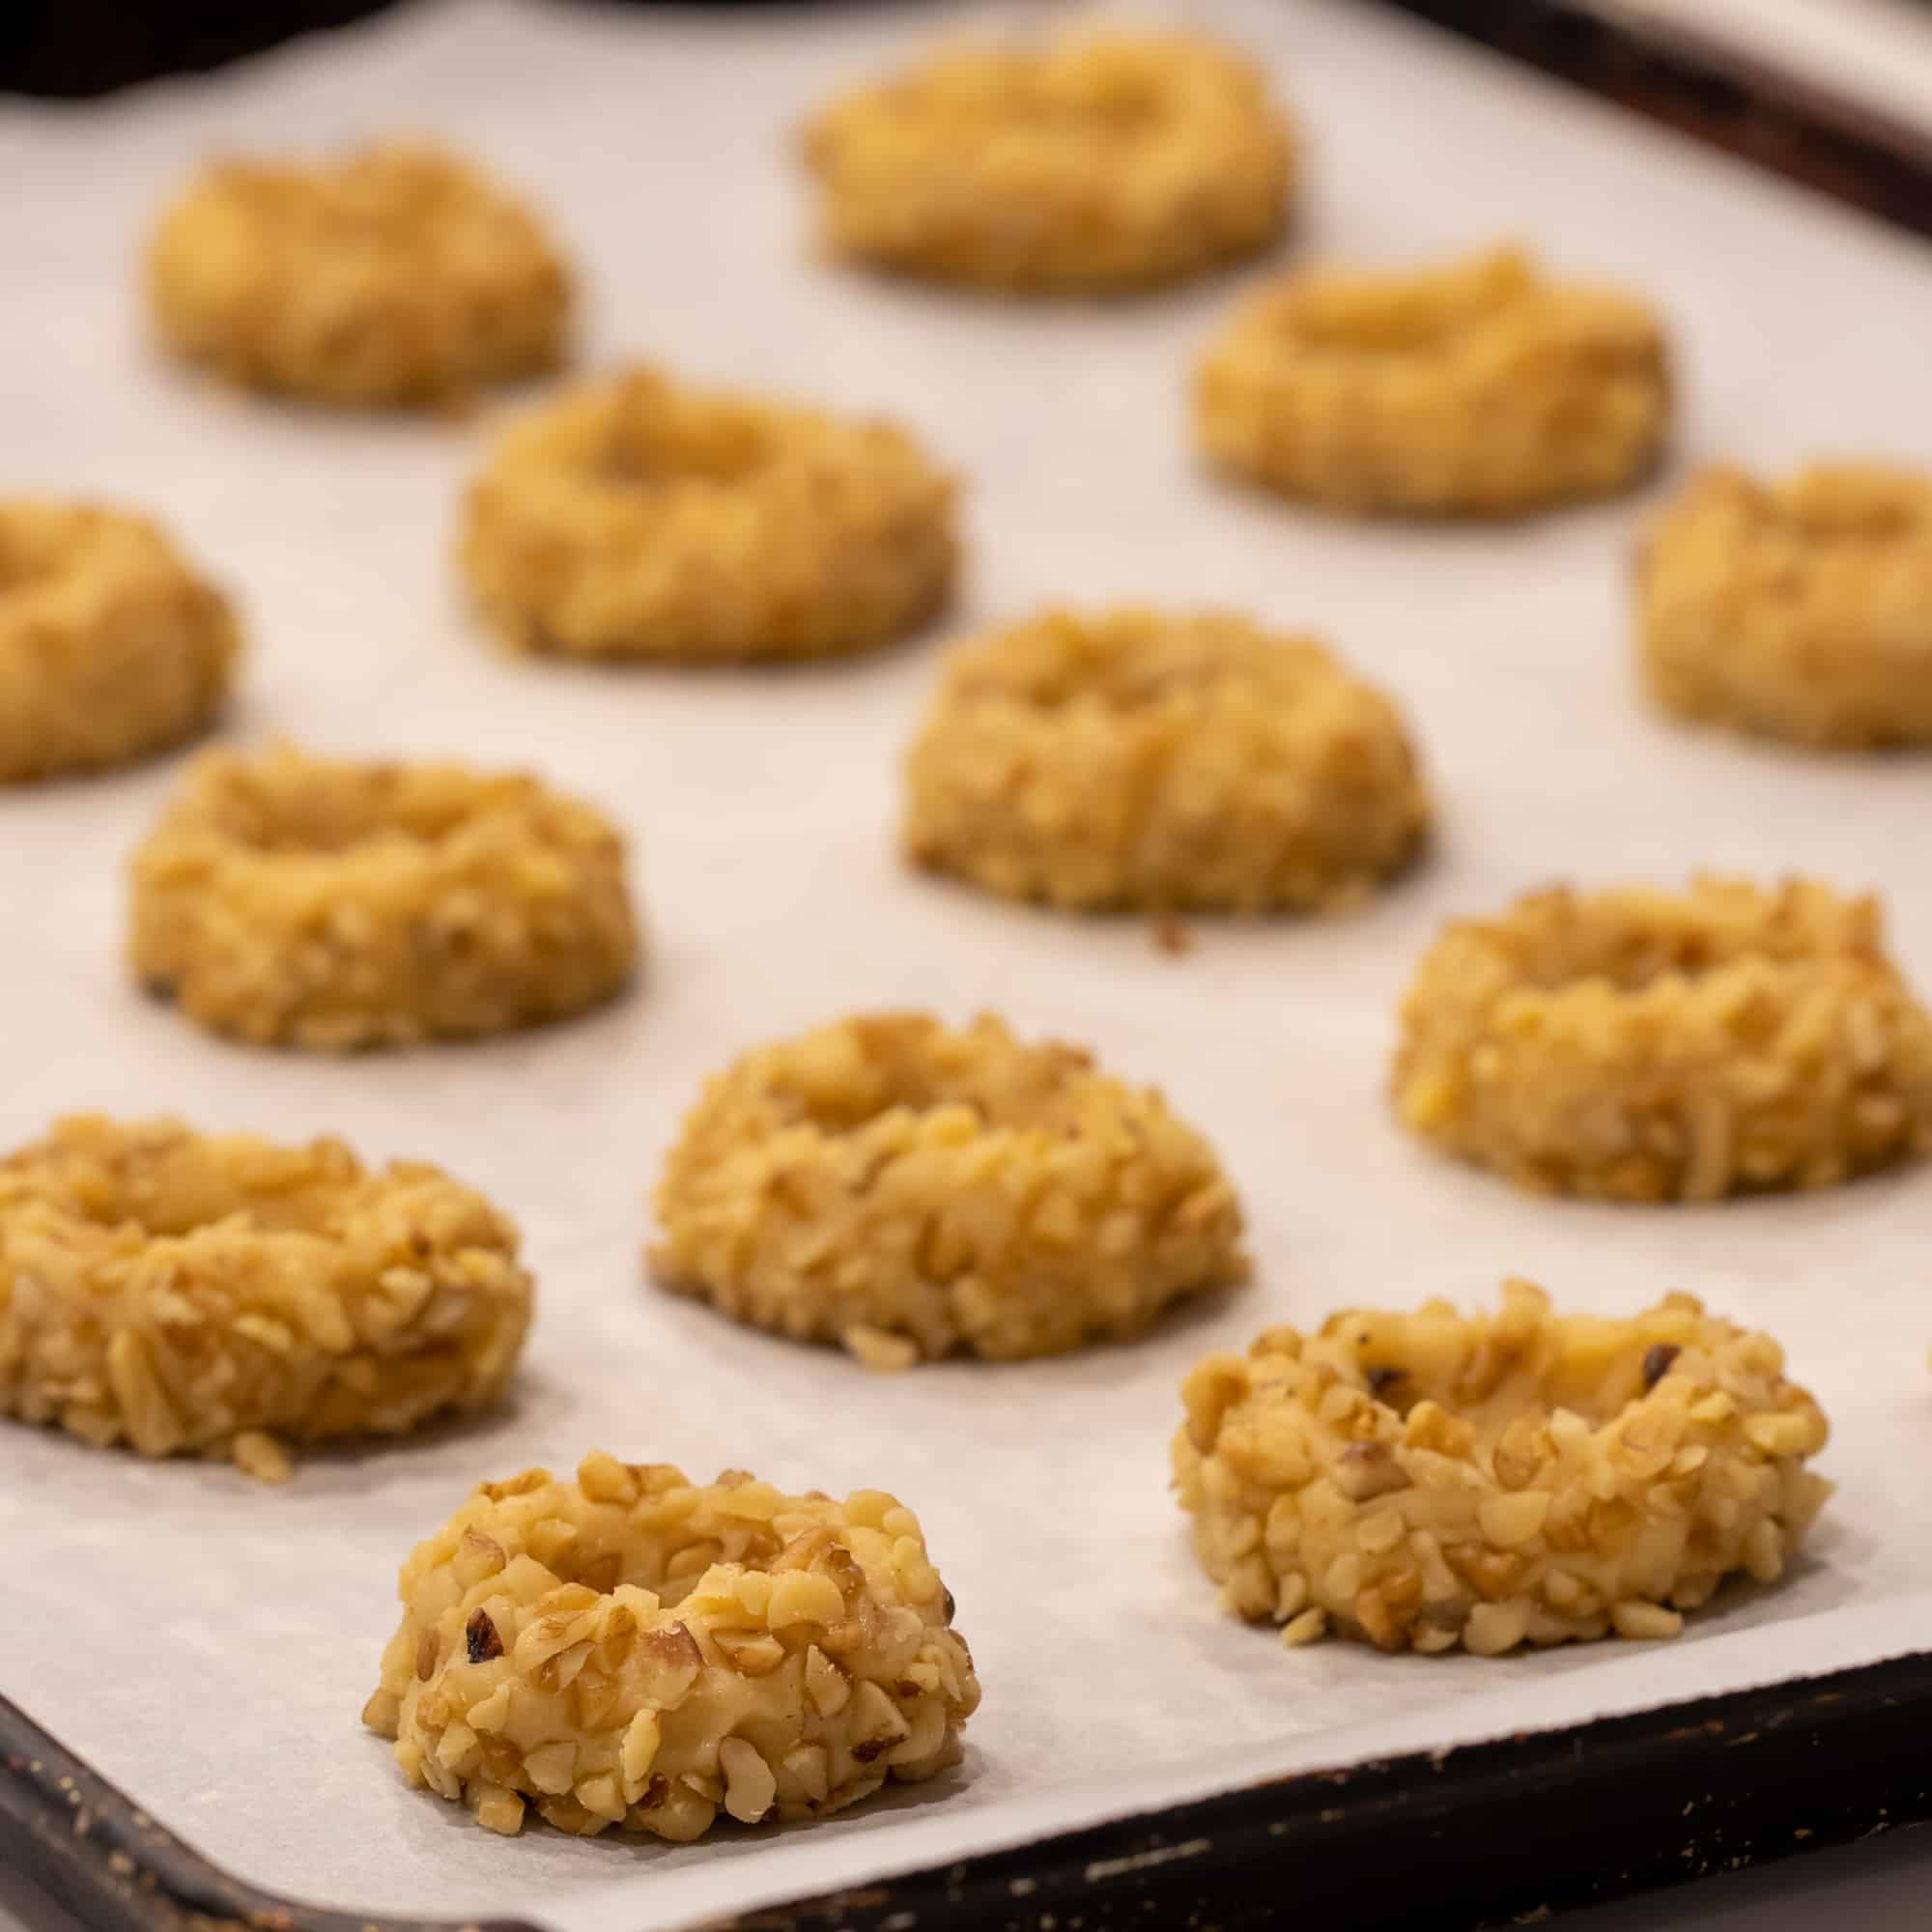 Line the cookies on a baking sheet lined with parchment paper or silicone sheet.